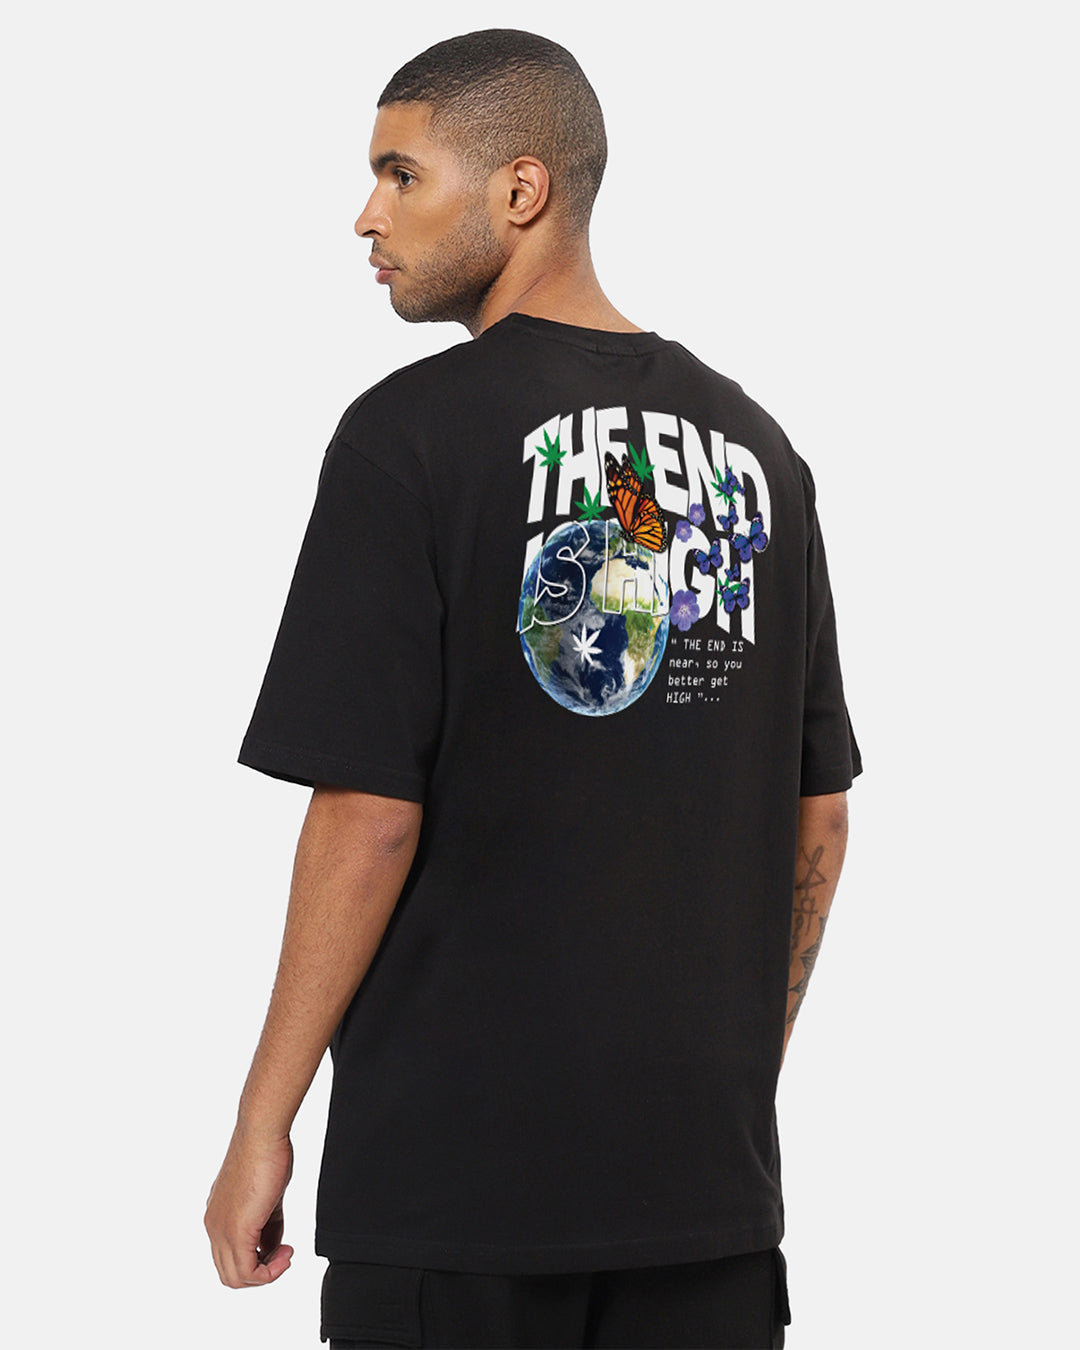 The End Is High Oversized Men's Tshirt